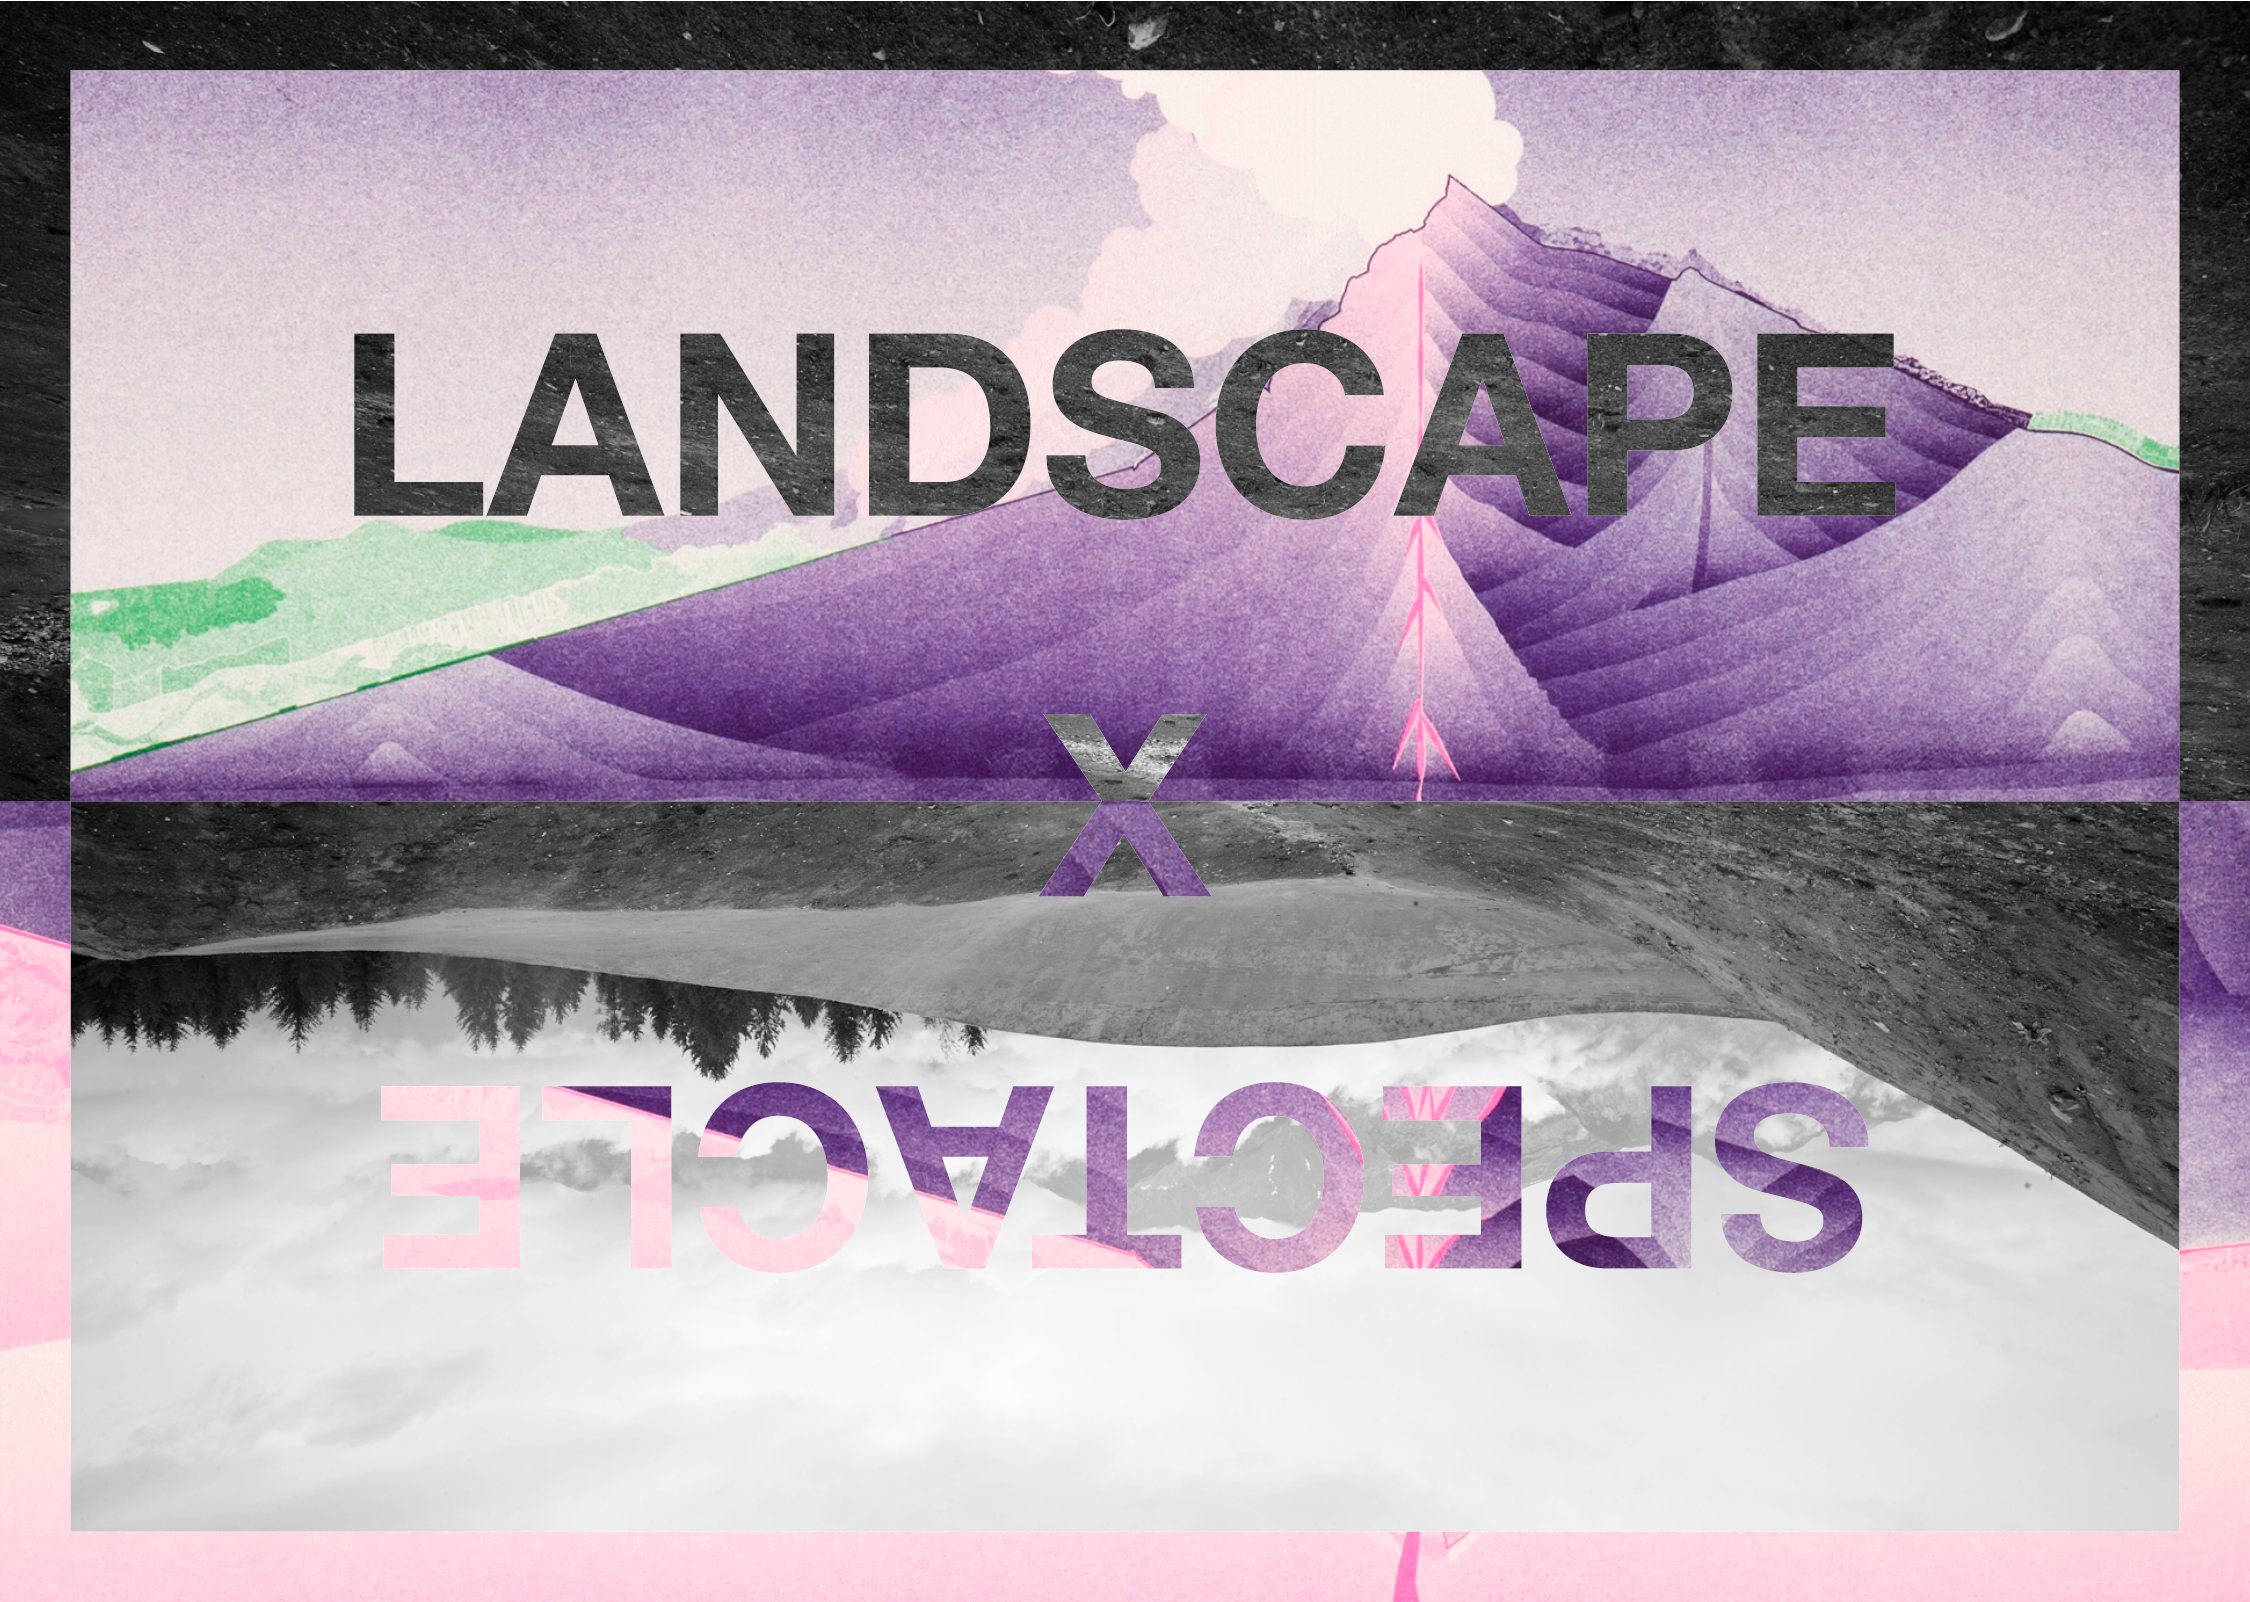 LandscapexSpectacle_Insta.jpg